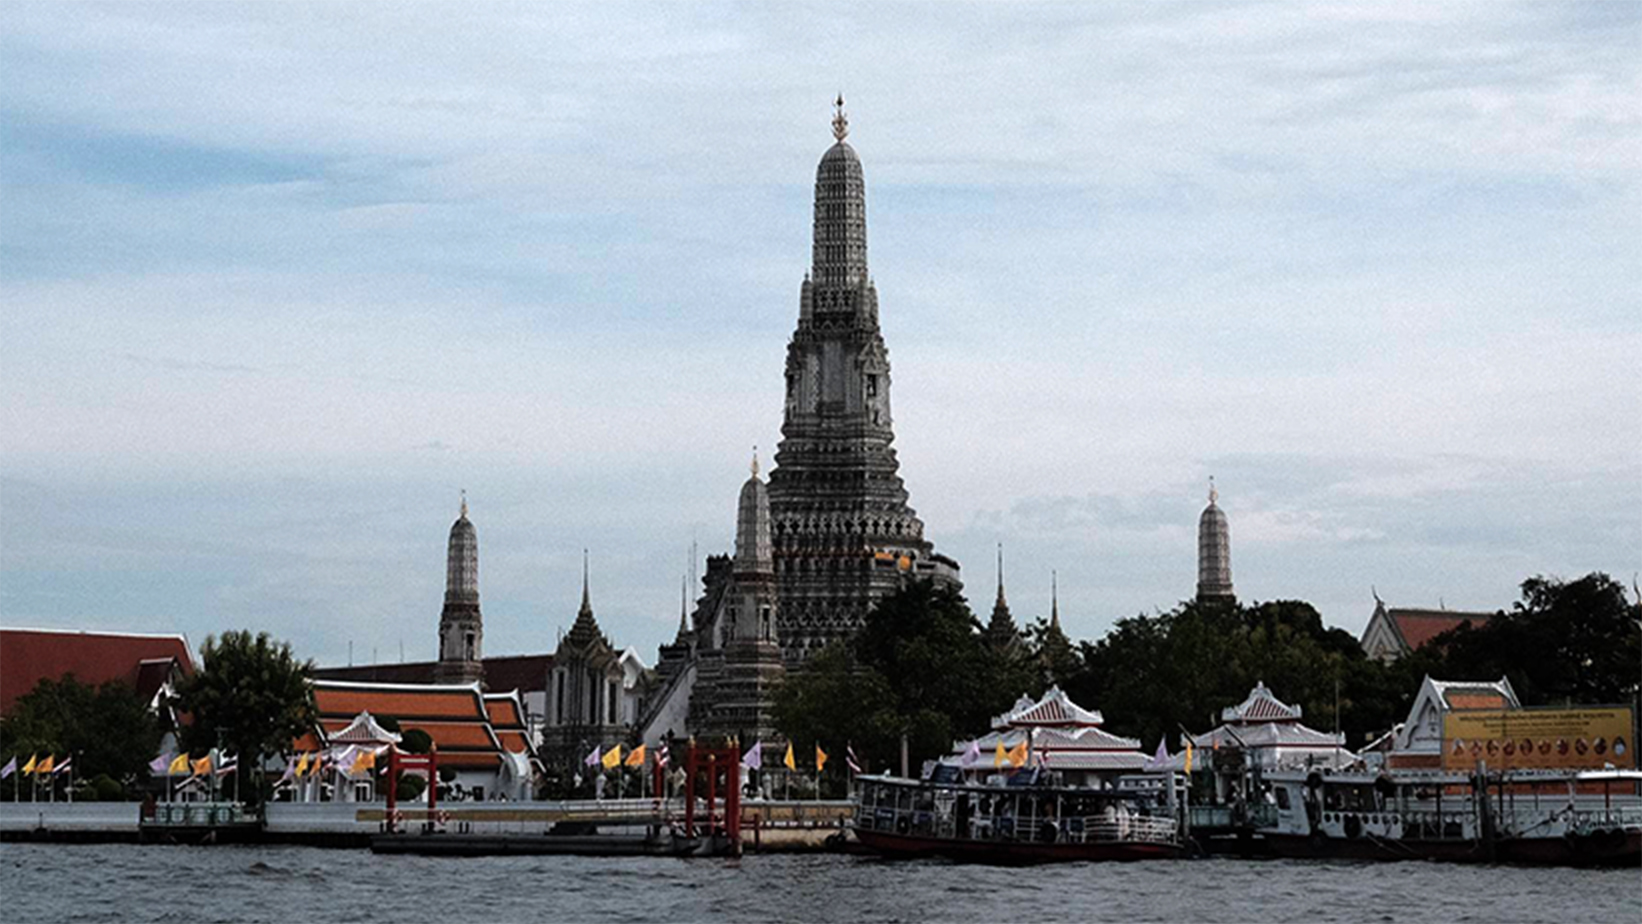 Wat Arun is located on the riverside of the Chao Phraya River.